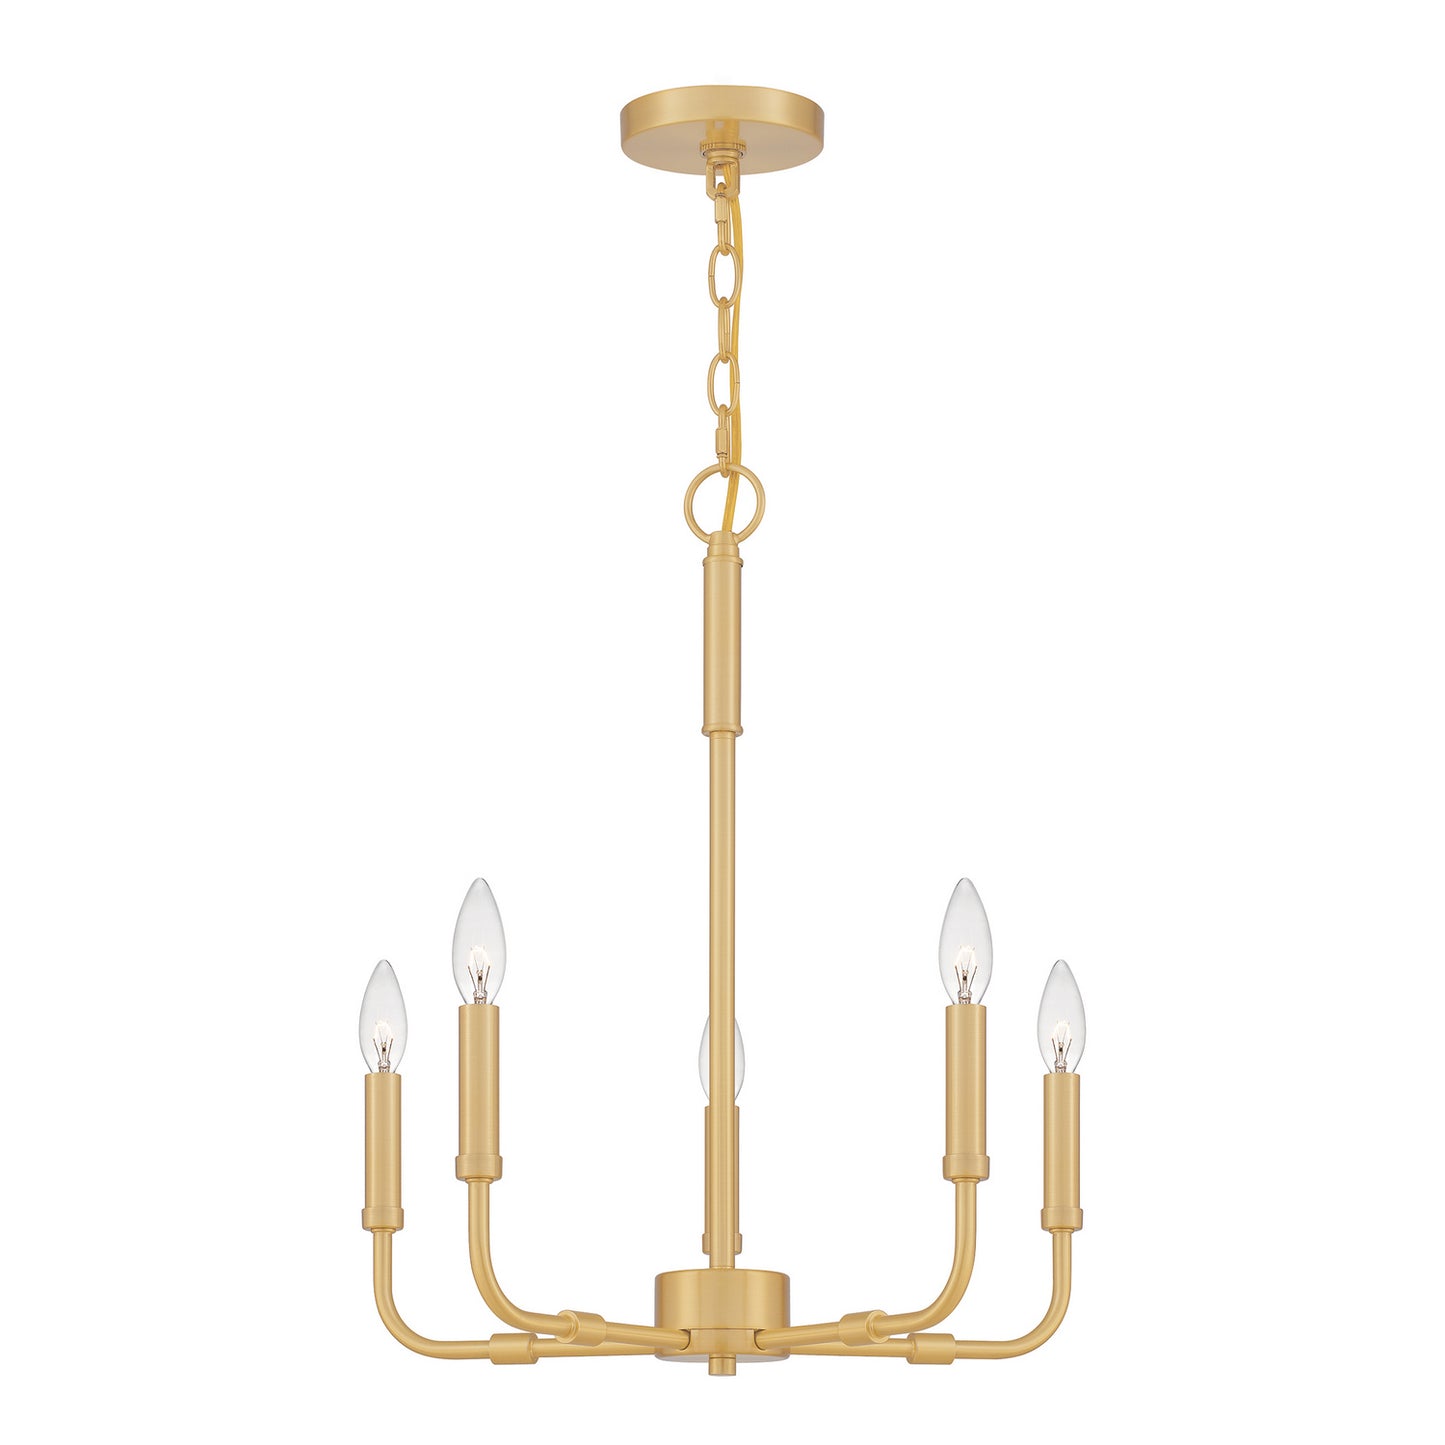 Abner Five Light Chandelier by Quoizel in Aged Brass Finish (ABR5018AB)